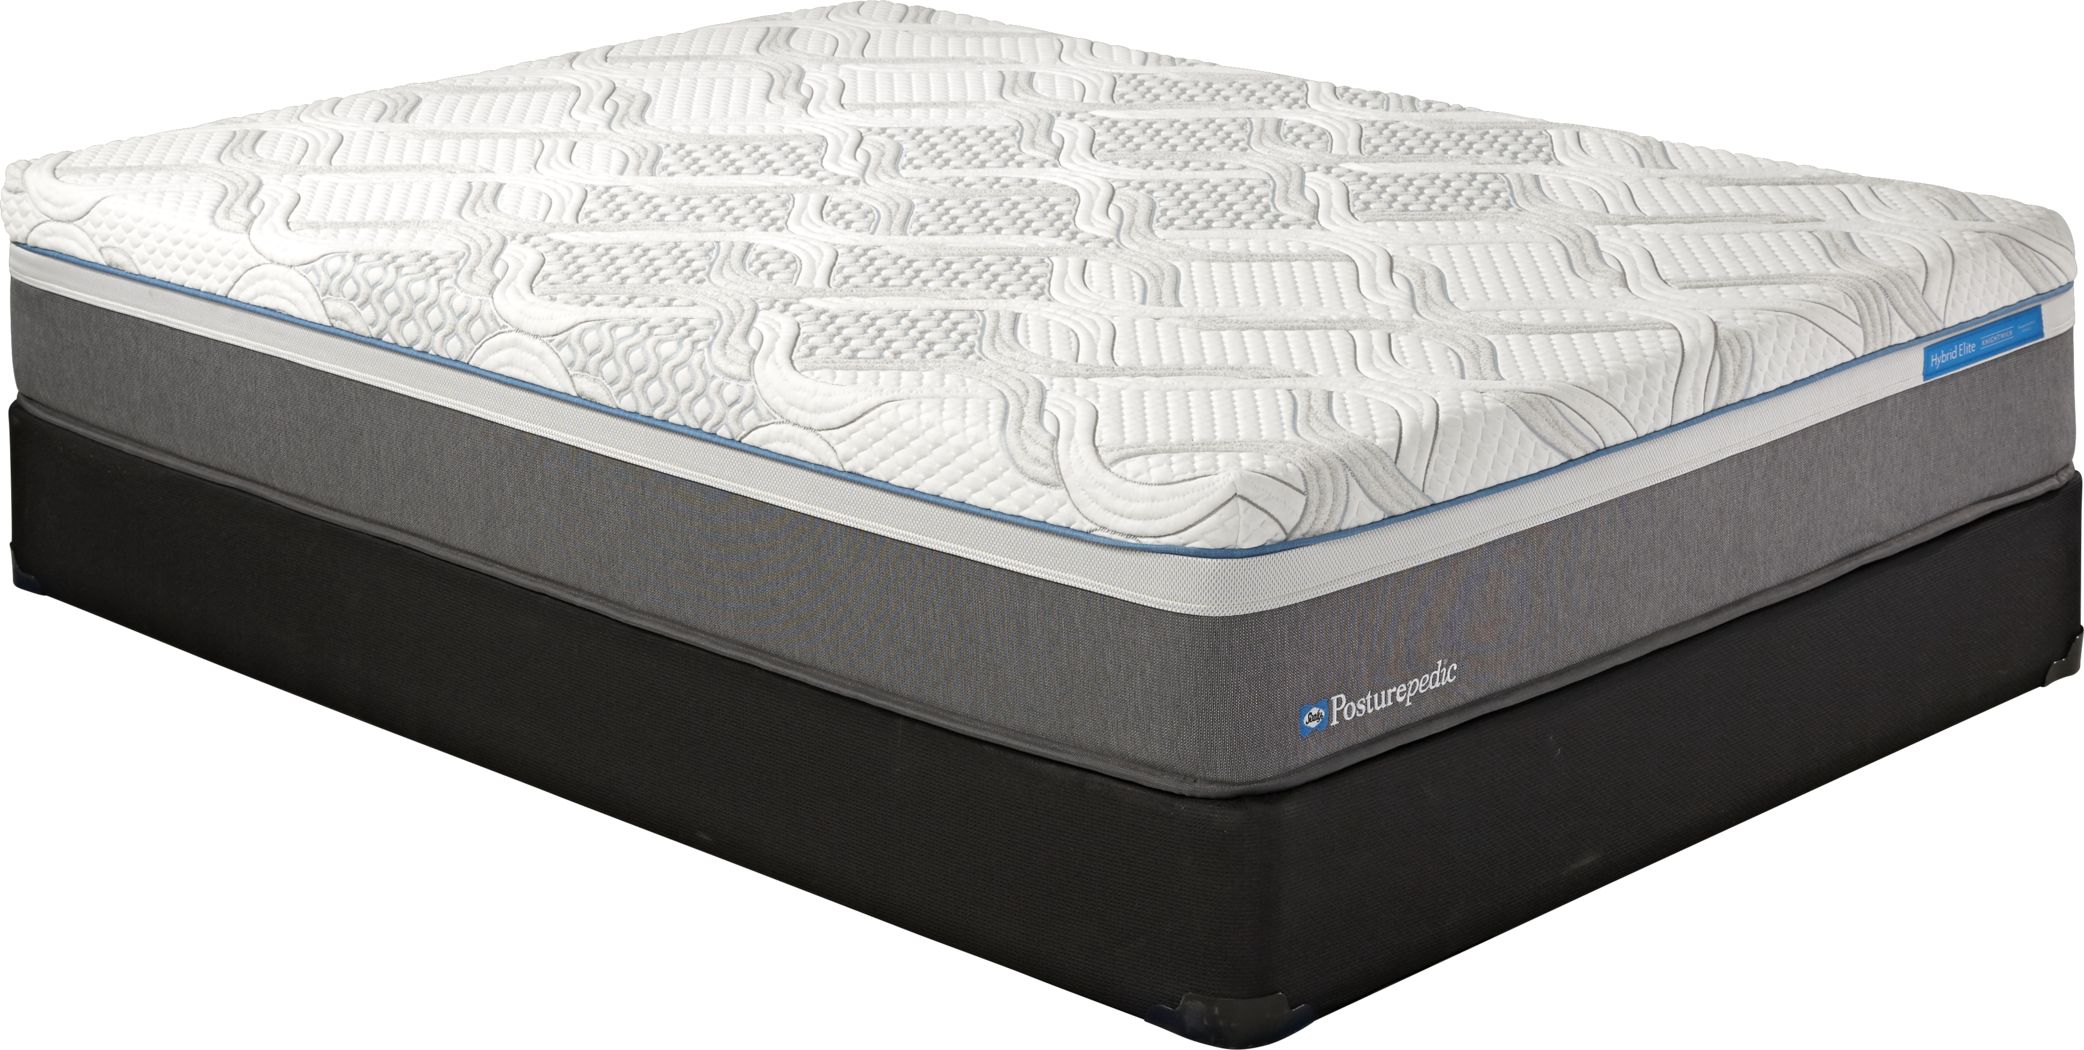 sealy premier posture dual sided mattress